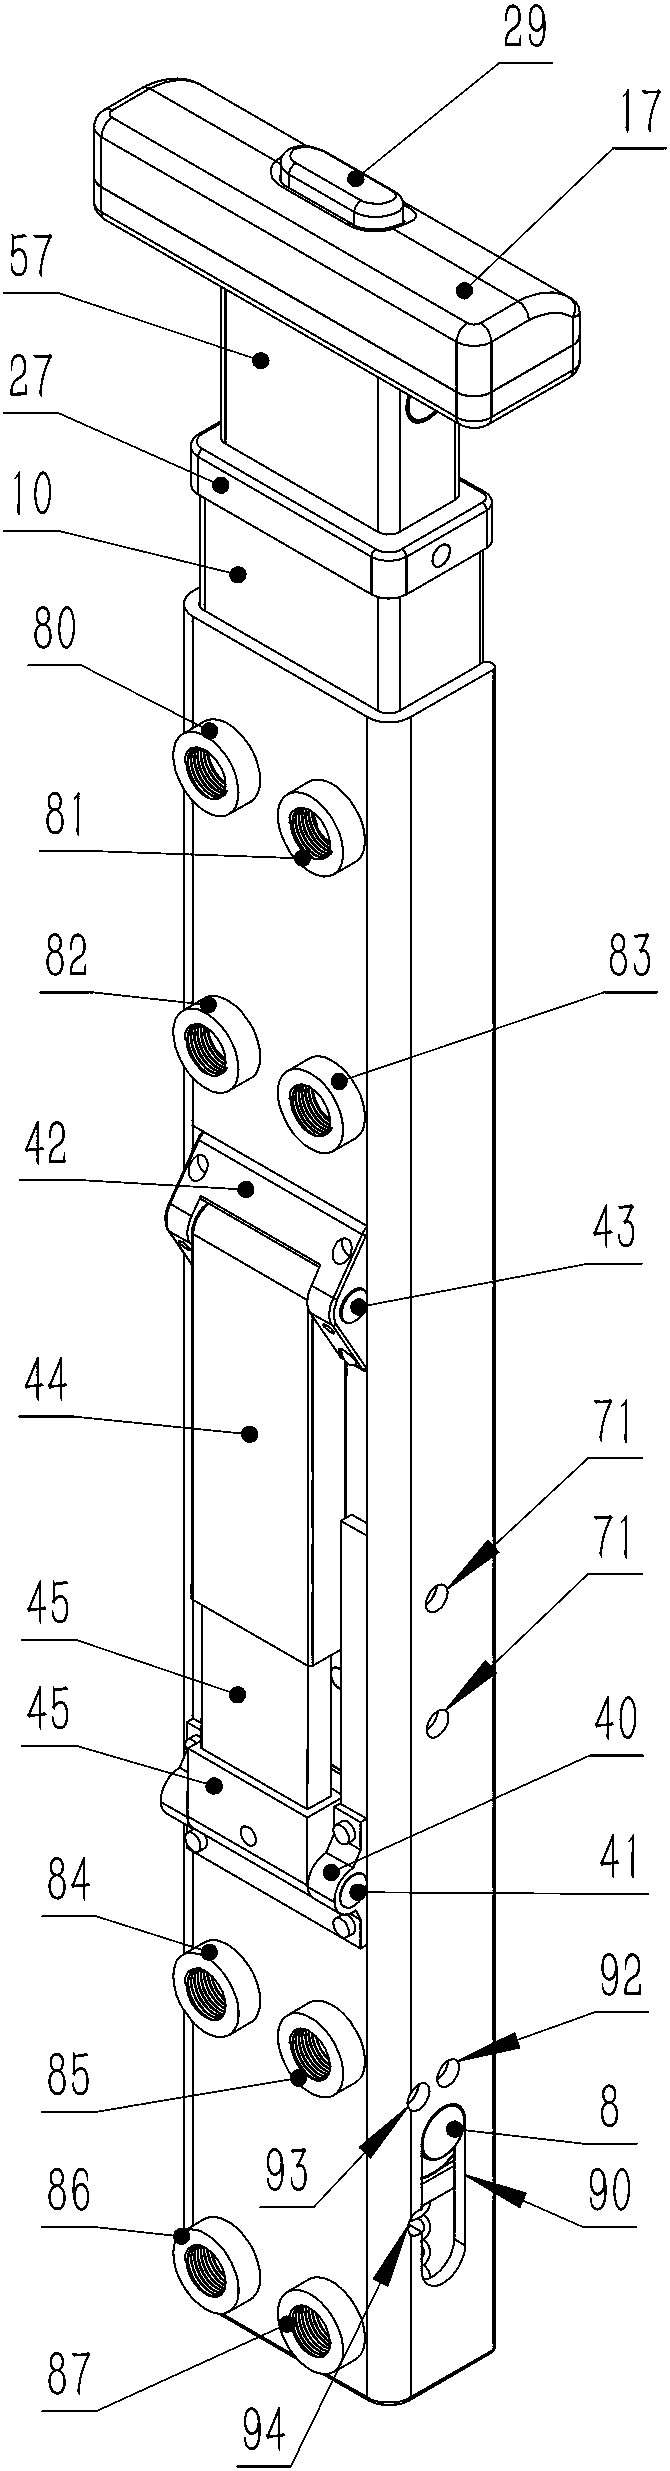 Variable angle suitcase pull bar